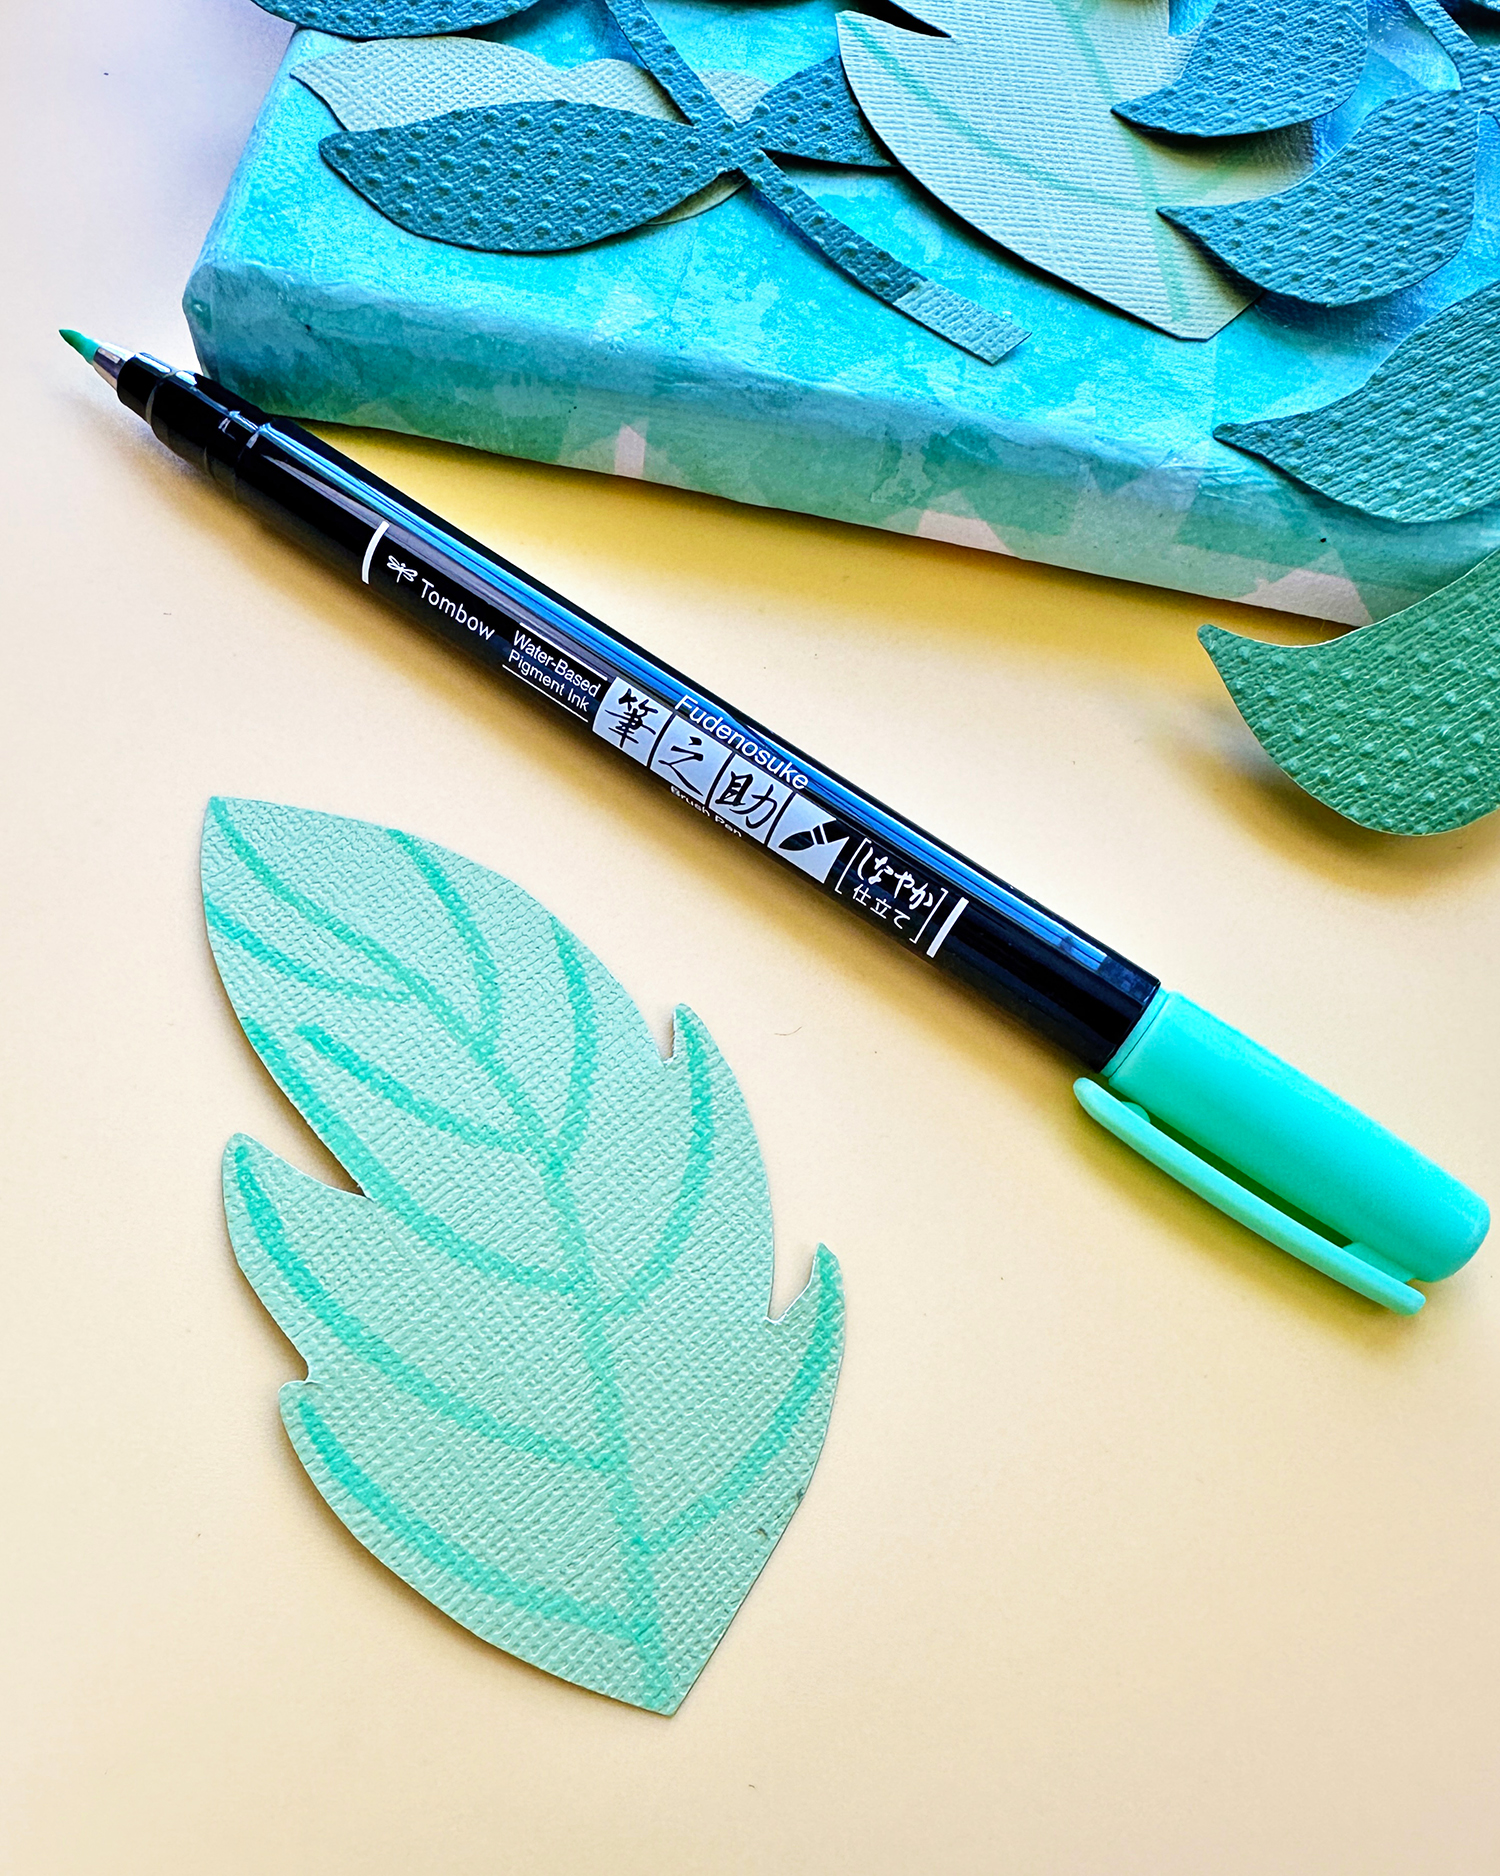 You can add details to the leaves. To draw the lines I used the Tombow Fudenosuke Brush Pen in Light Green.  #tombow